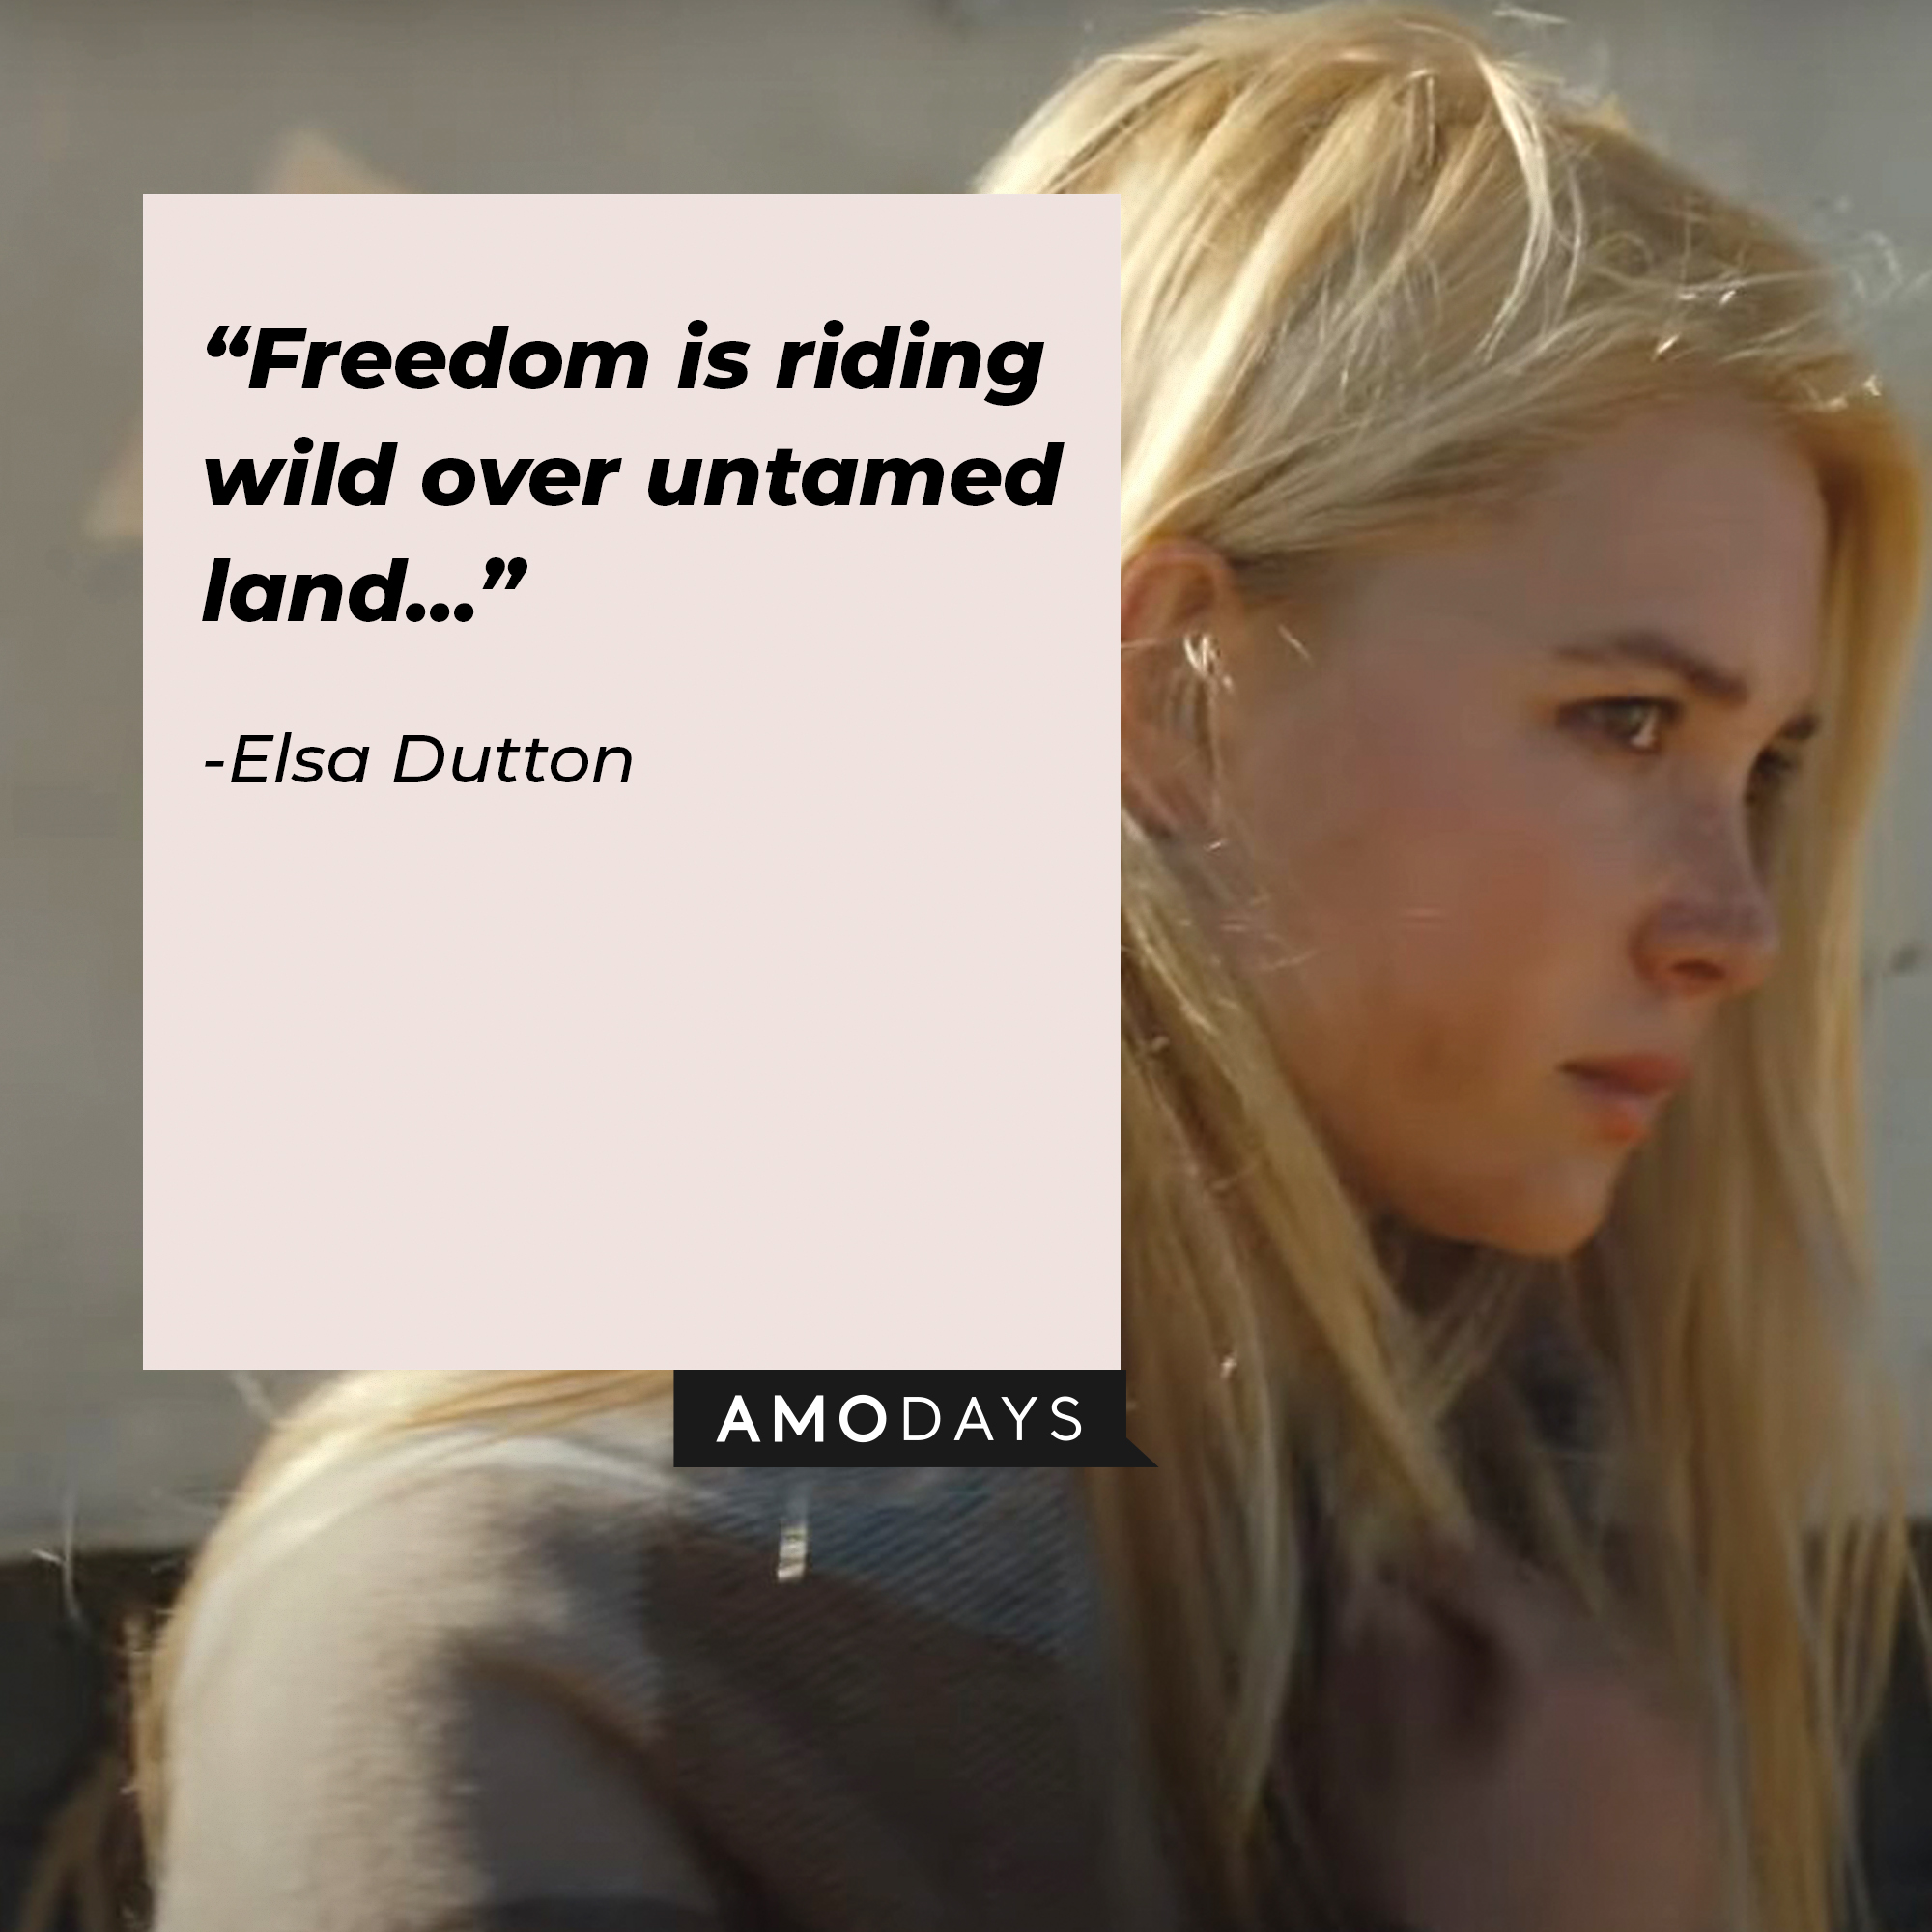 An image of Elsa Dutton with her quote: “Freedom is riding wild over untamed land...”┃Source: youtube.com/yellowstone